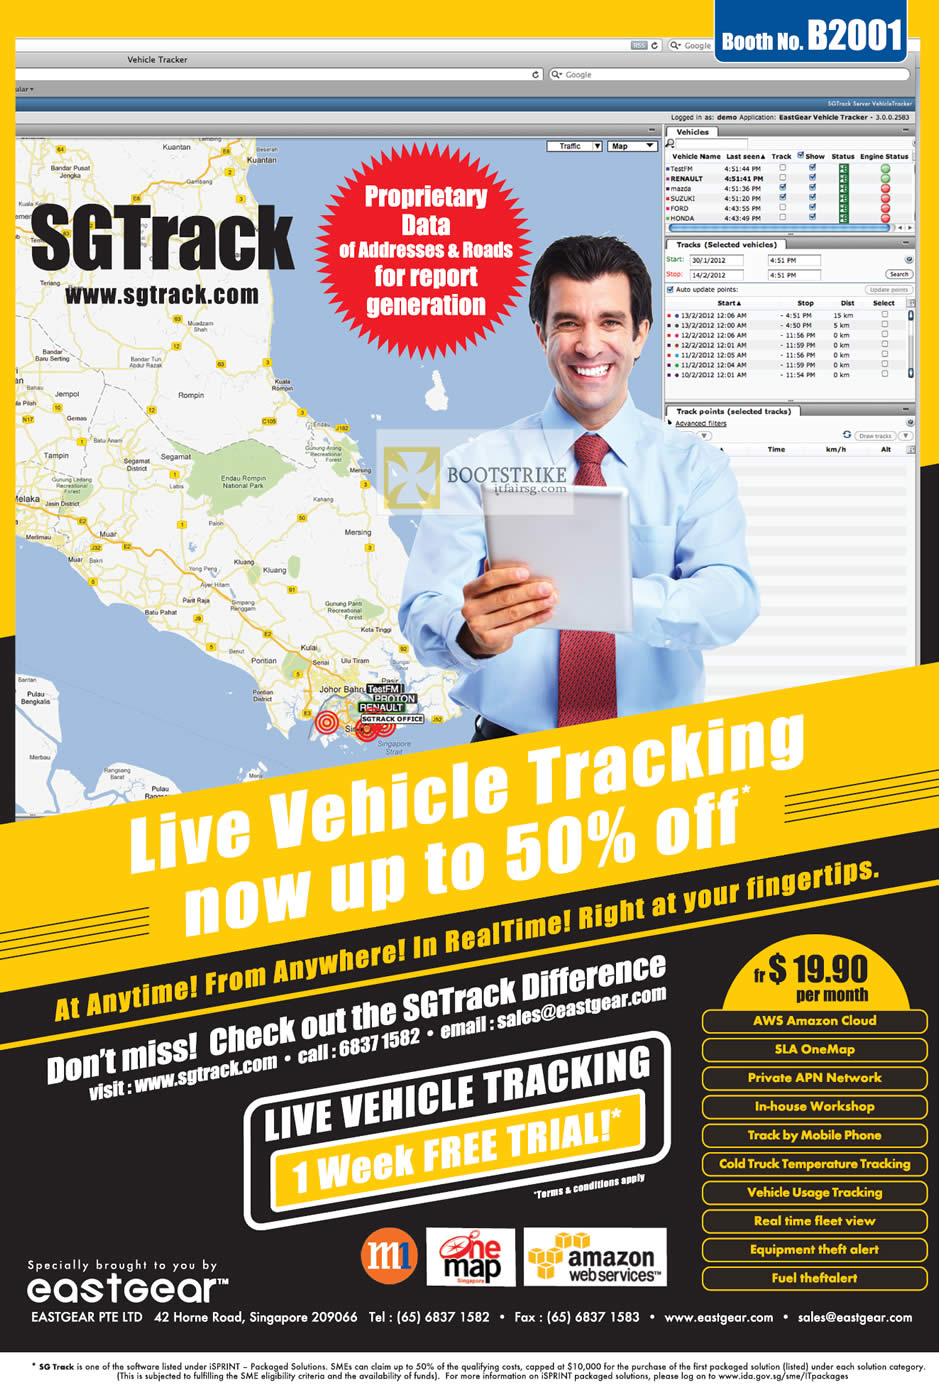 PC SHOW 2012 price list image brochure of Eastgear SGTrack Live Vehicle Tracking Onemap